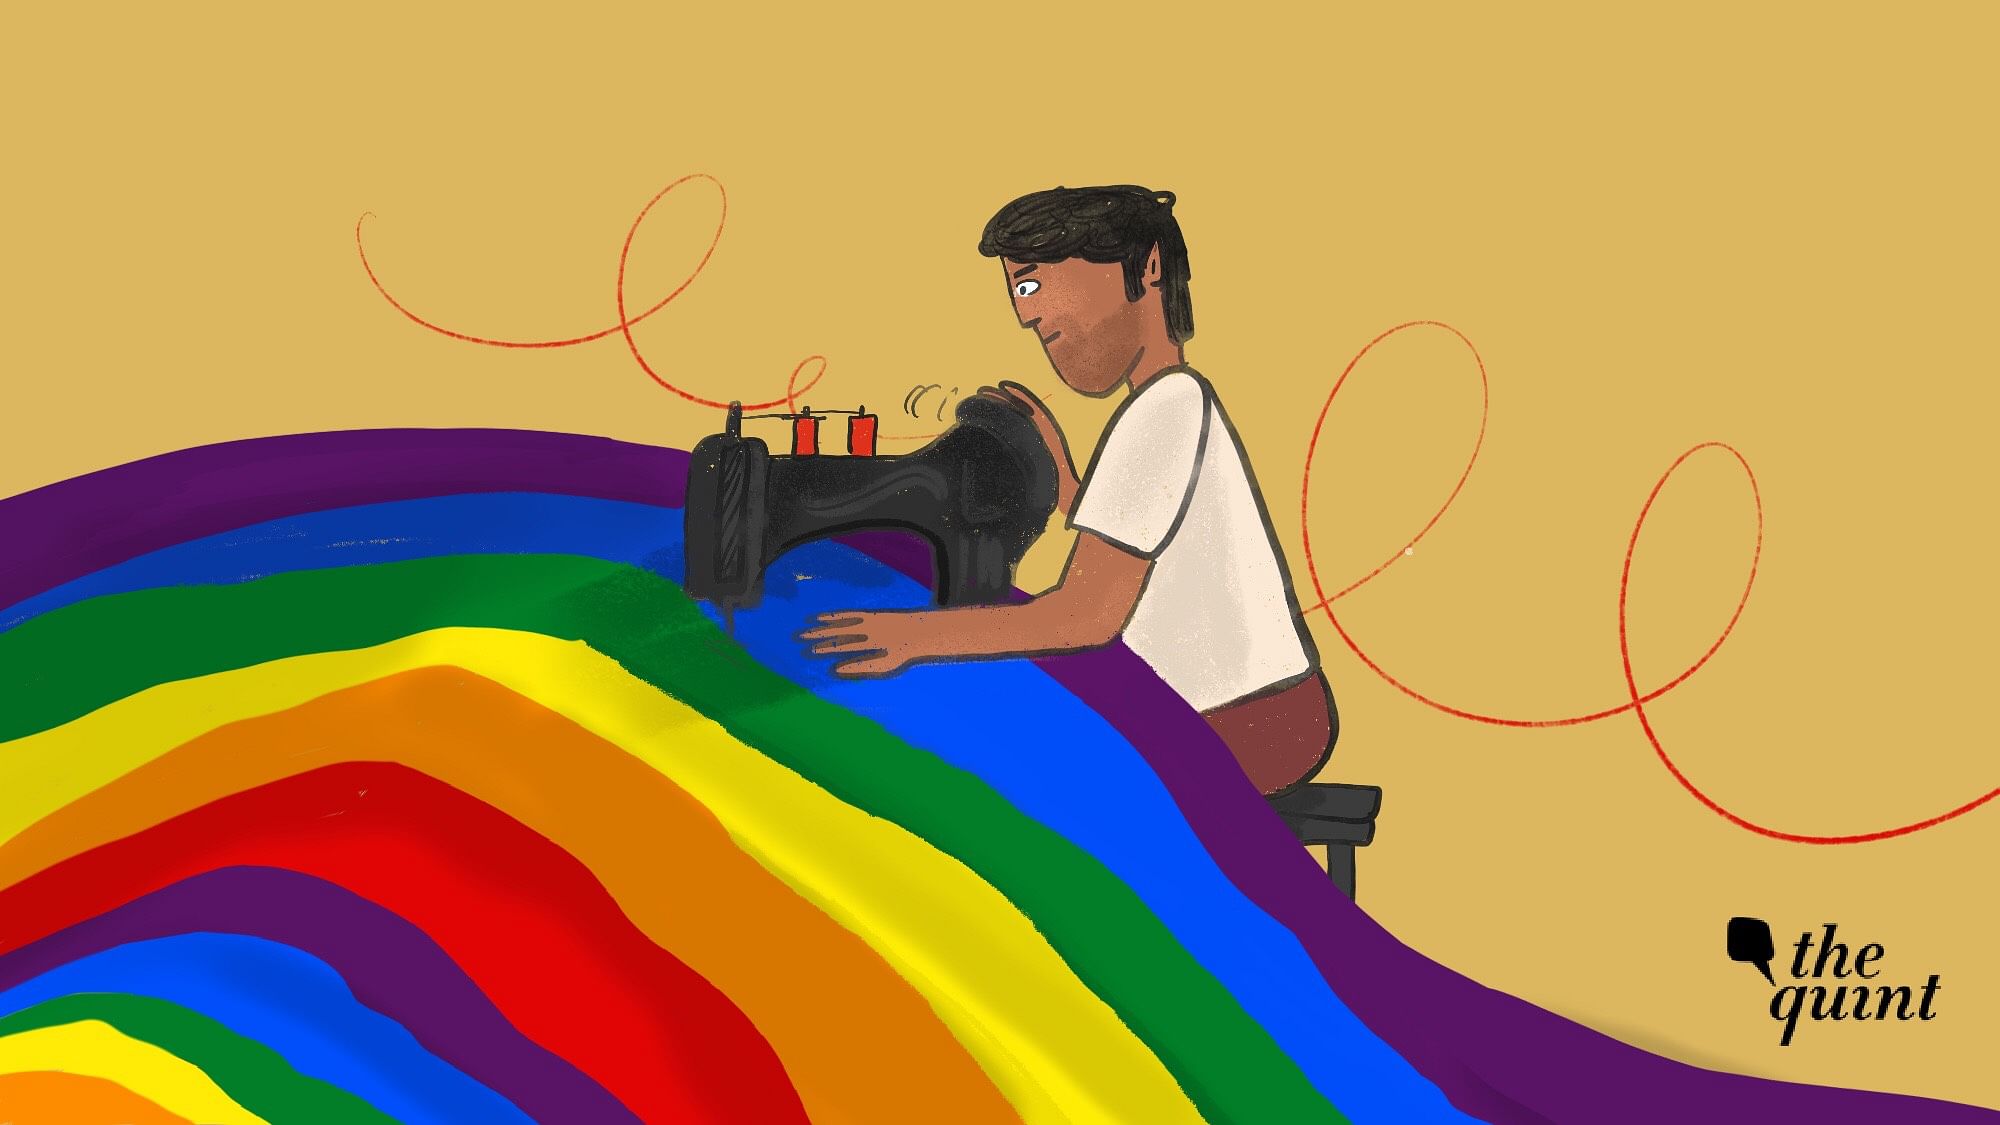 Illustration of the creator of the rainbow flag, Gilbert Baker, stitching the flag.